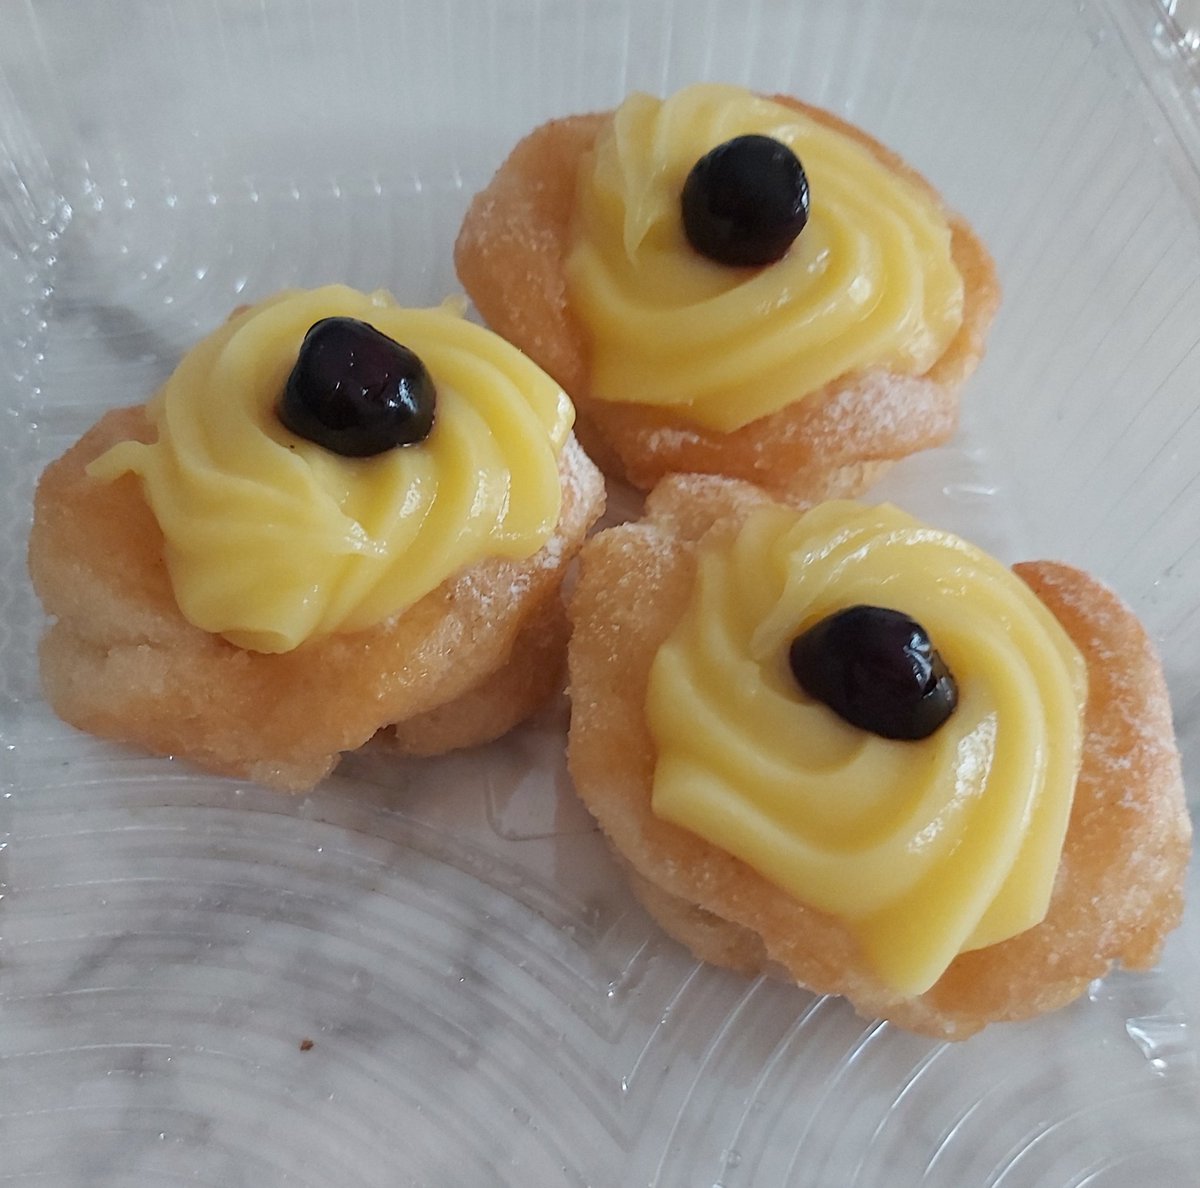 Have you ever tasted #zeppoledisangiuseppe ? They are Italian cream pastries made for the #feastofstjoseph . Zeppole are delicious 😋 
#march19th #stjosephsday🇮🇹 #italianculinarytraditions #italianfathersday